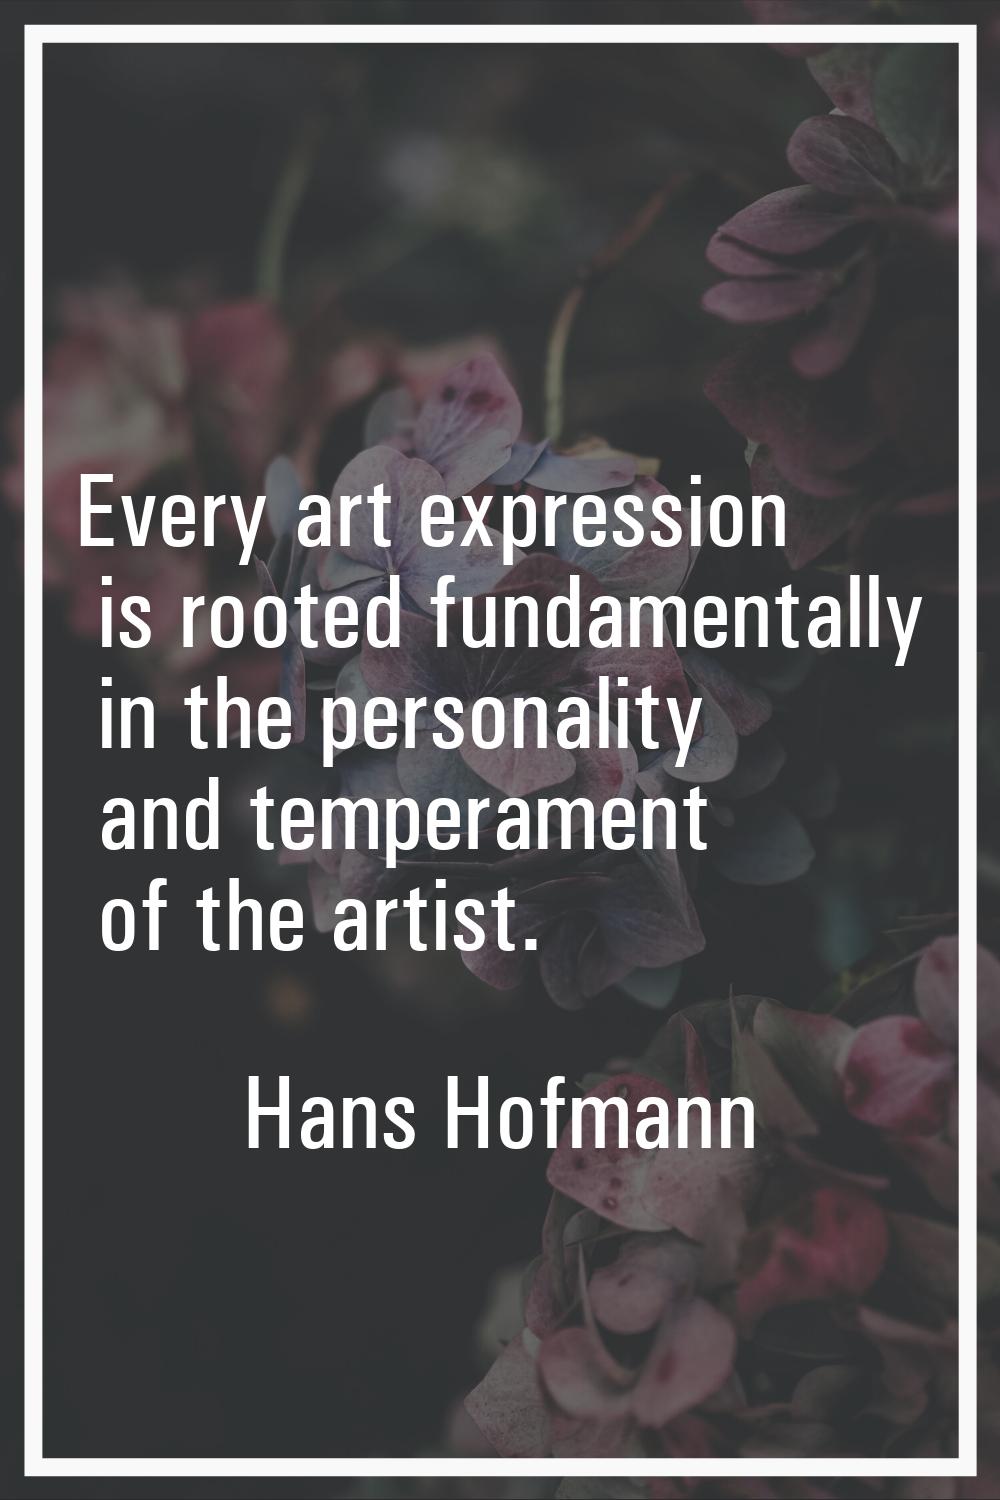 Every art expression is rooted fundamentally in the personality and temperament of the artist.